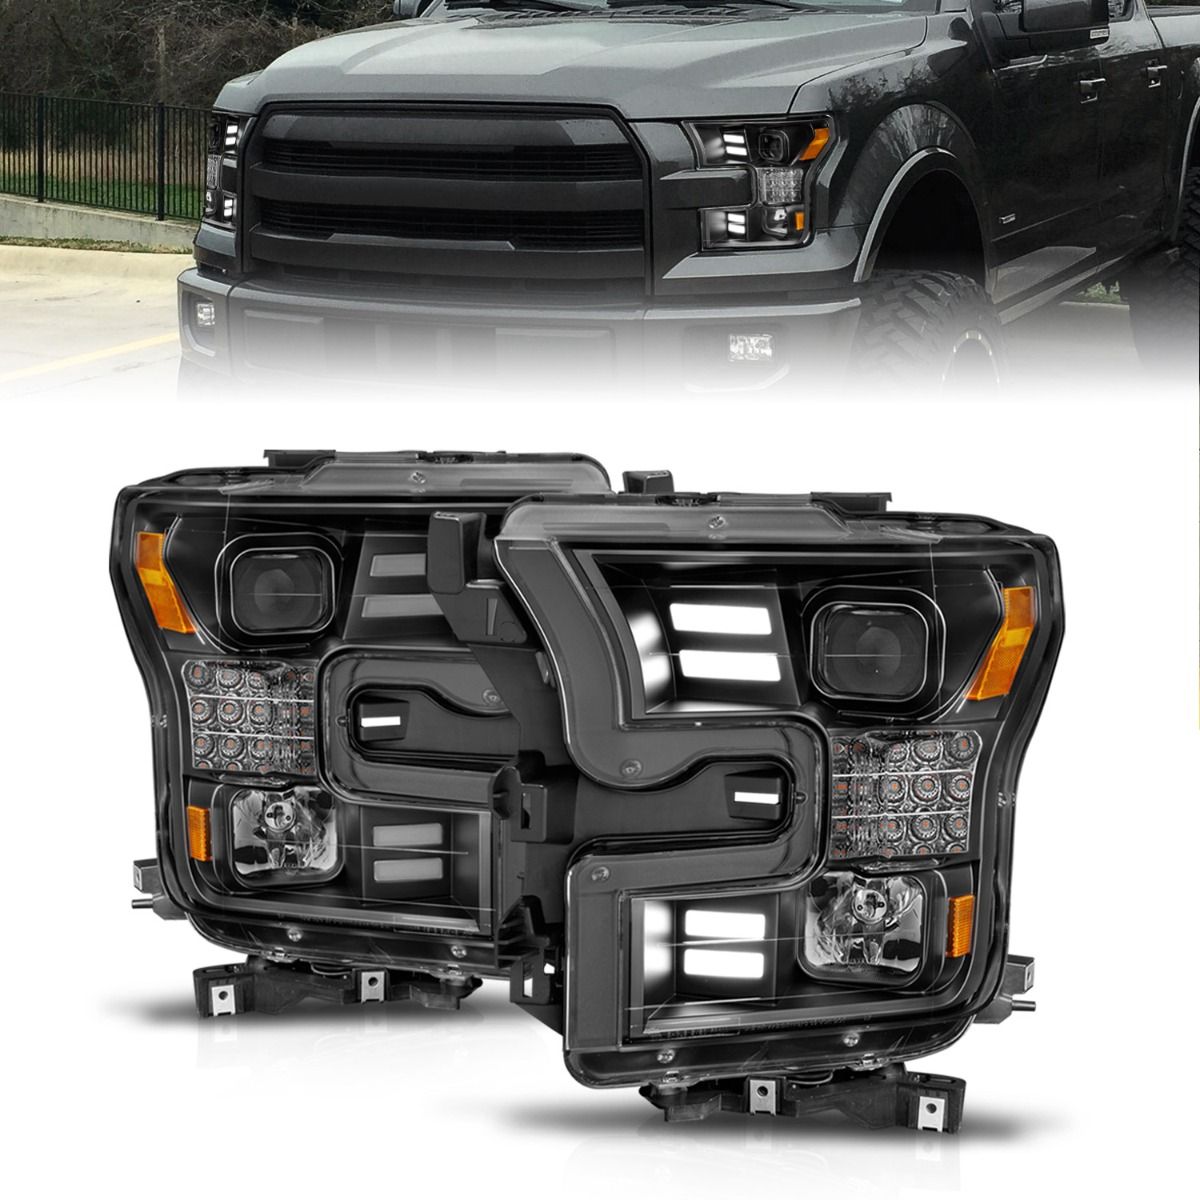 Ford Projector Lights, Ford F 150 15 -17  Projector Lights, Projector Lights, Ford Black Projector Light, Anzo